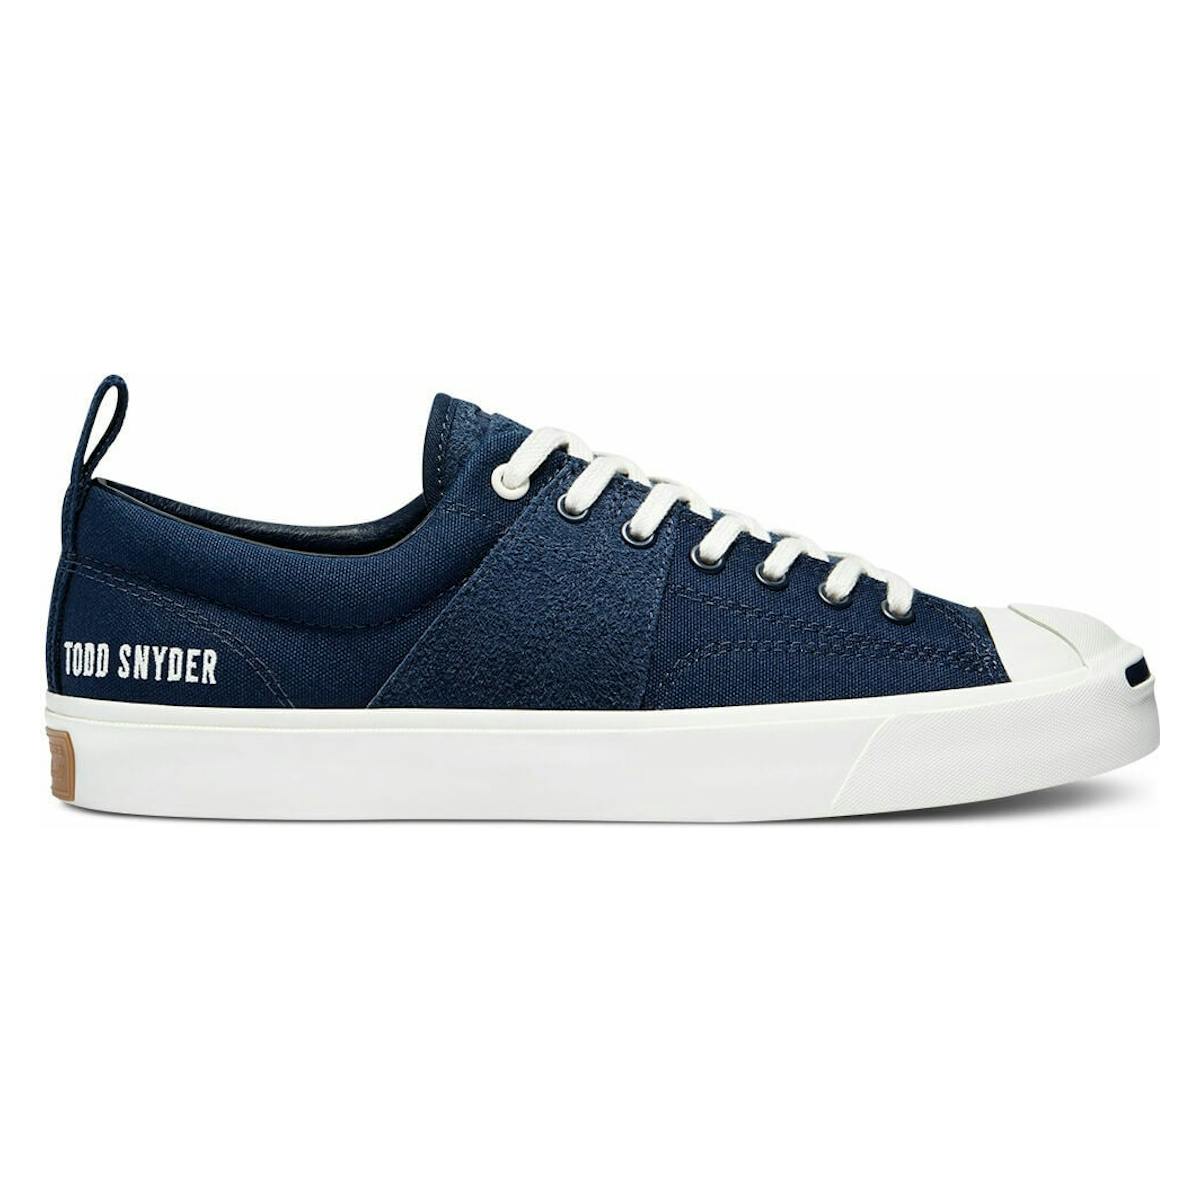 Todd Snyder x Converse Jack Purcell OX "Obsidian"